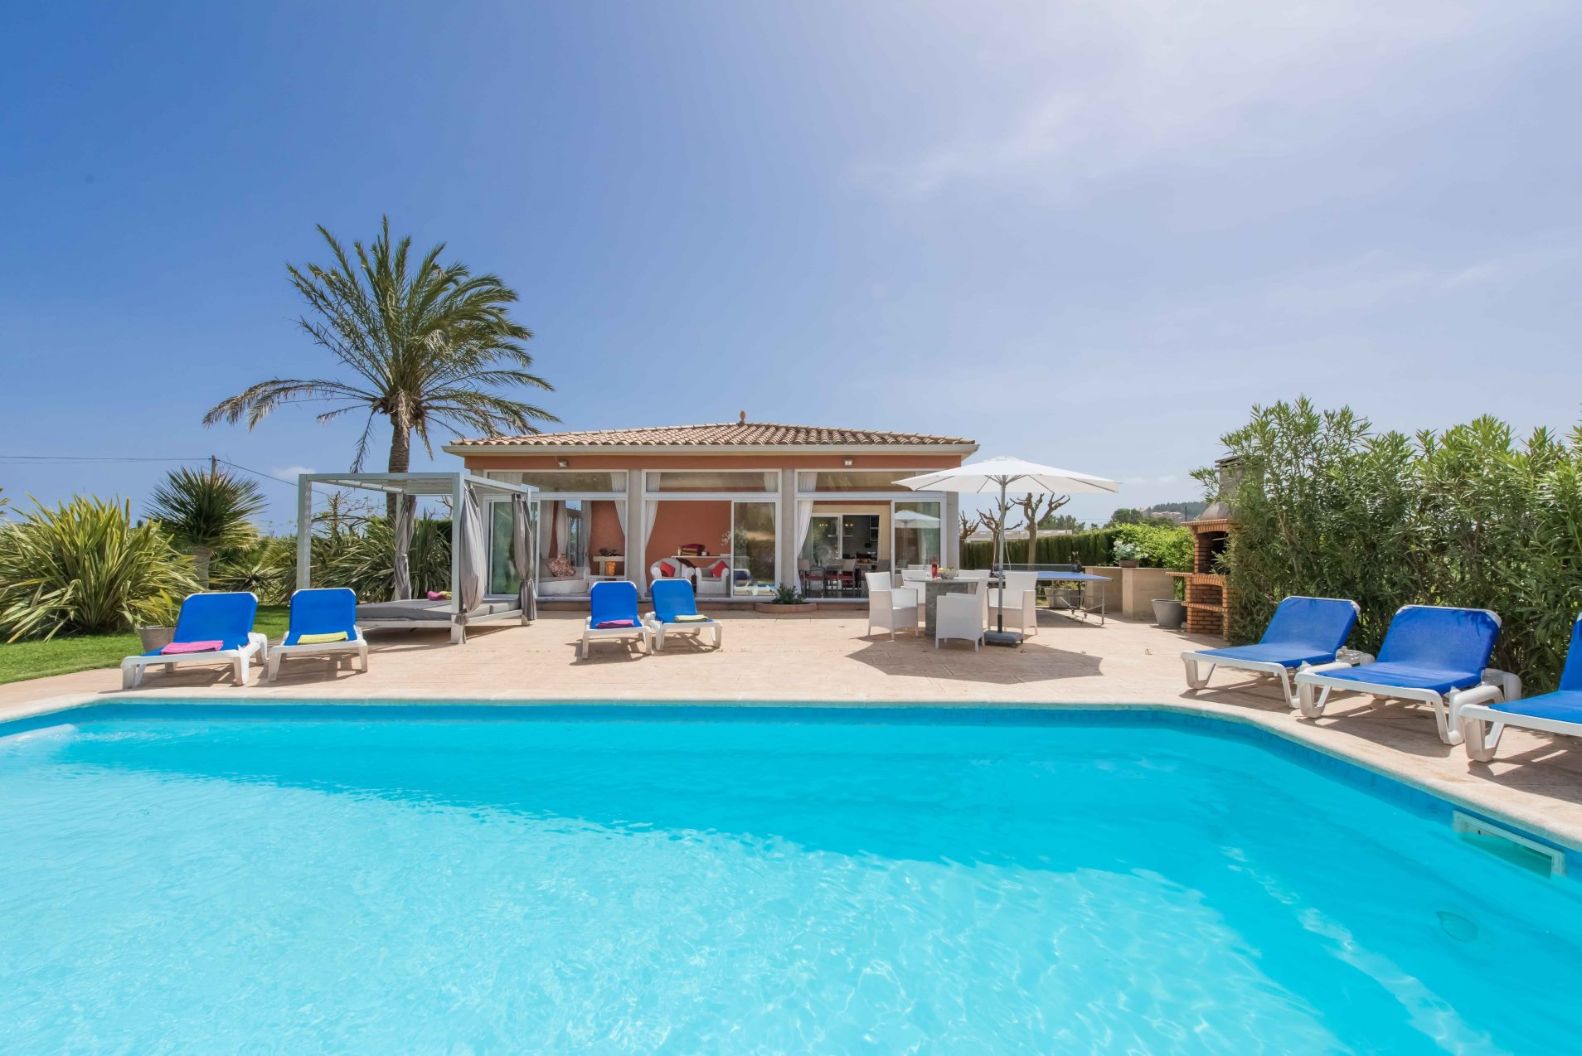 4 bedroom holiday villa within easy walking distance to Puerto Pollensa beach